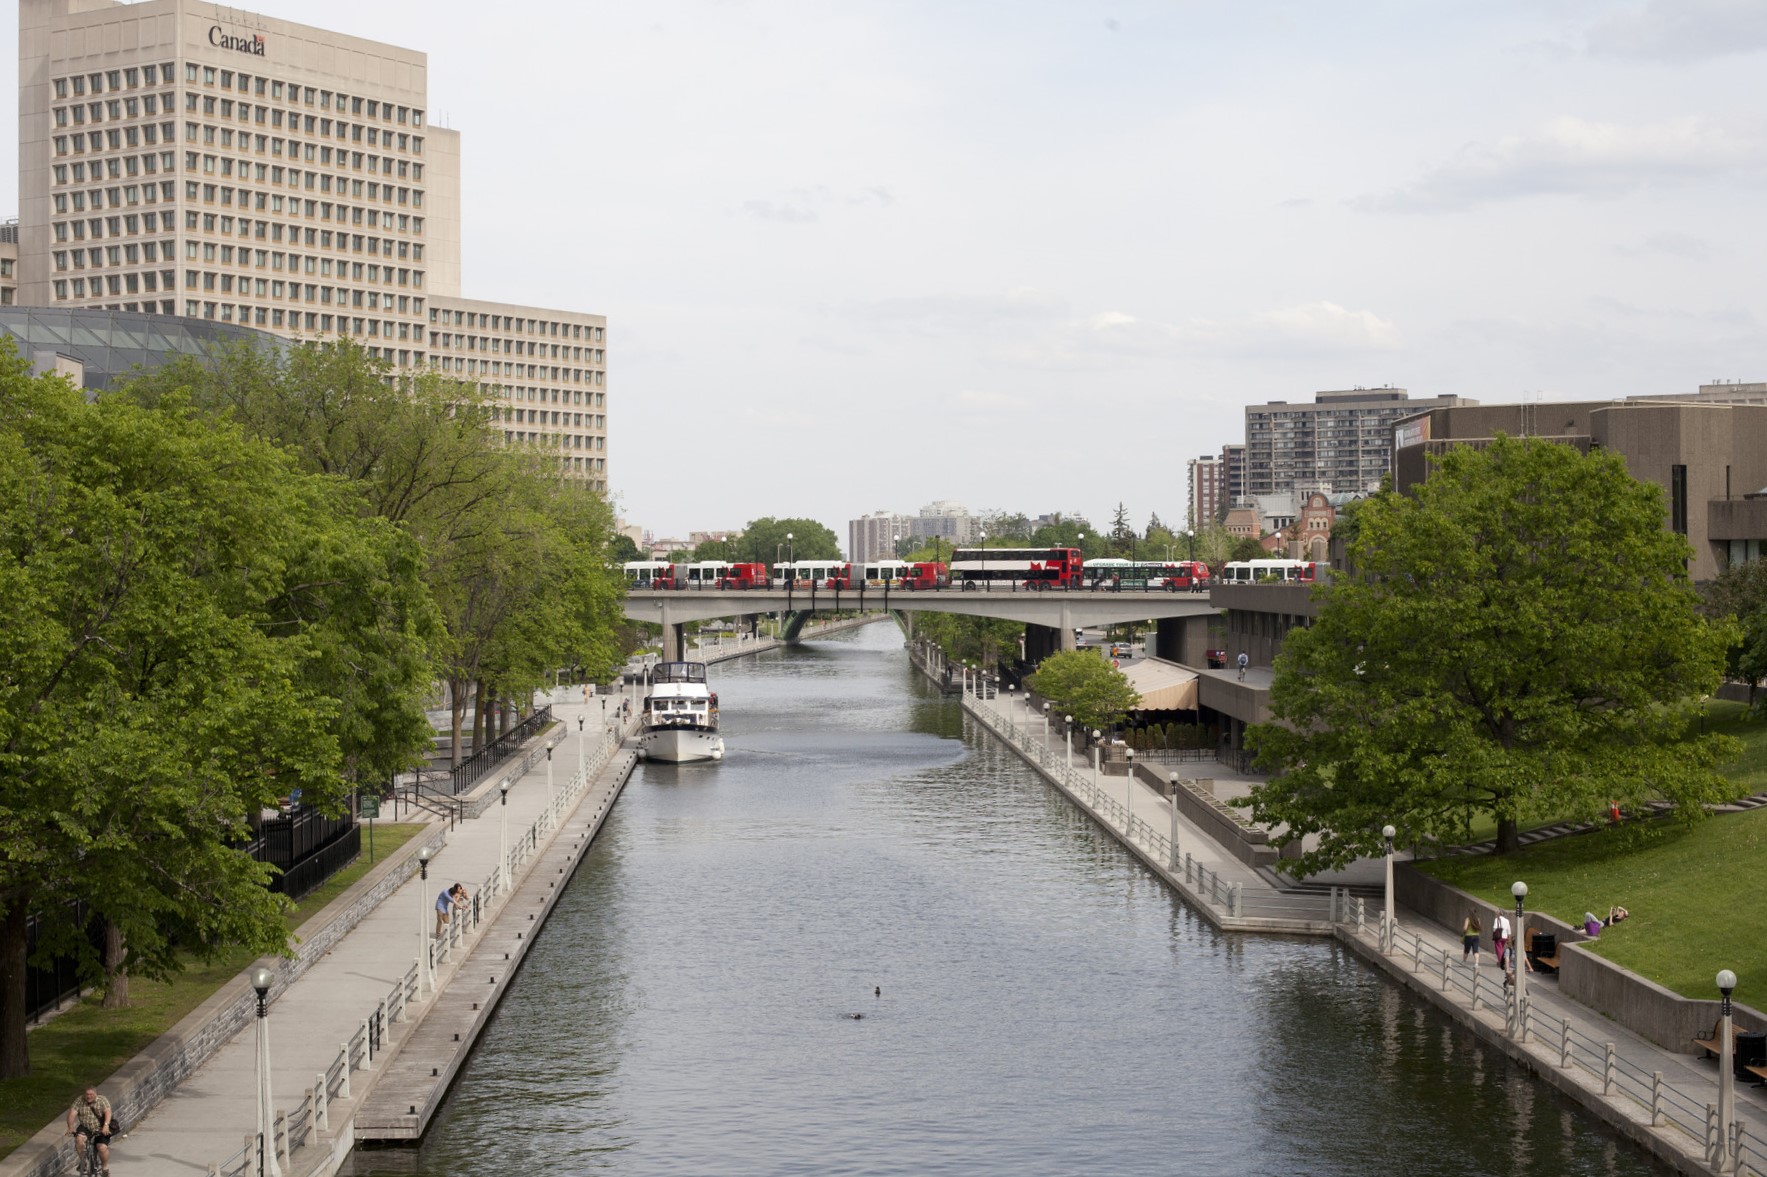 A photo of the Rideau canal in Ottawa, Ontario